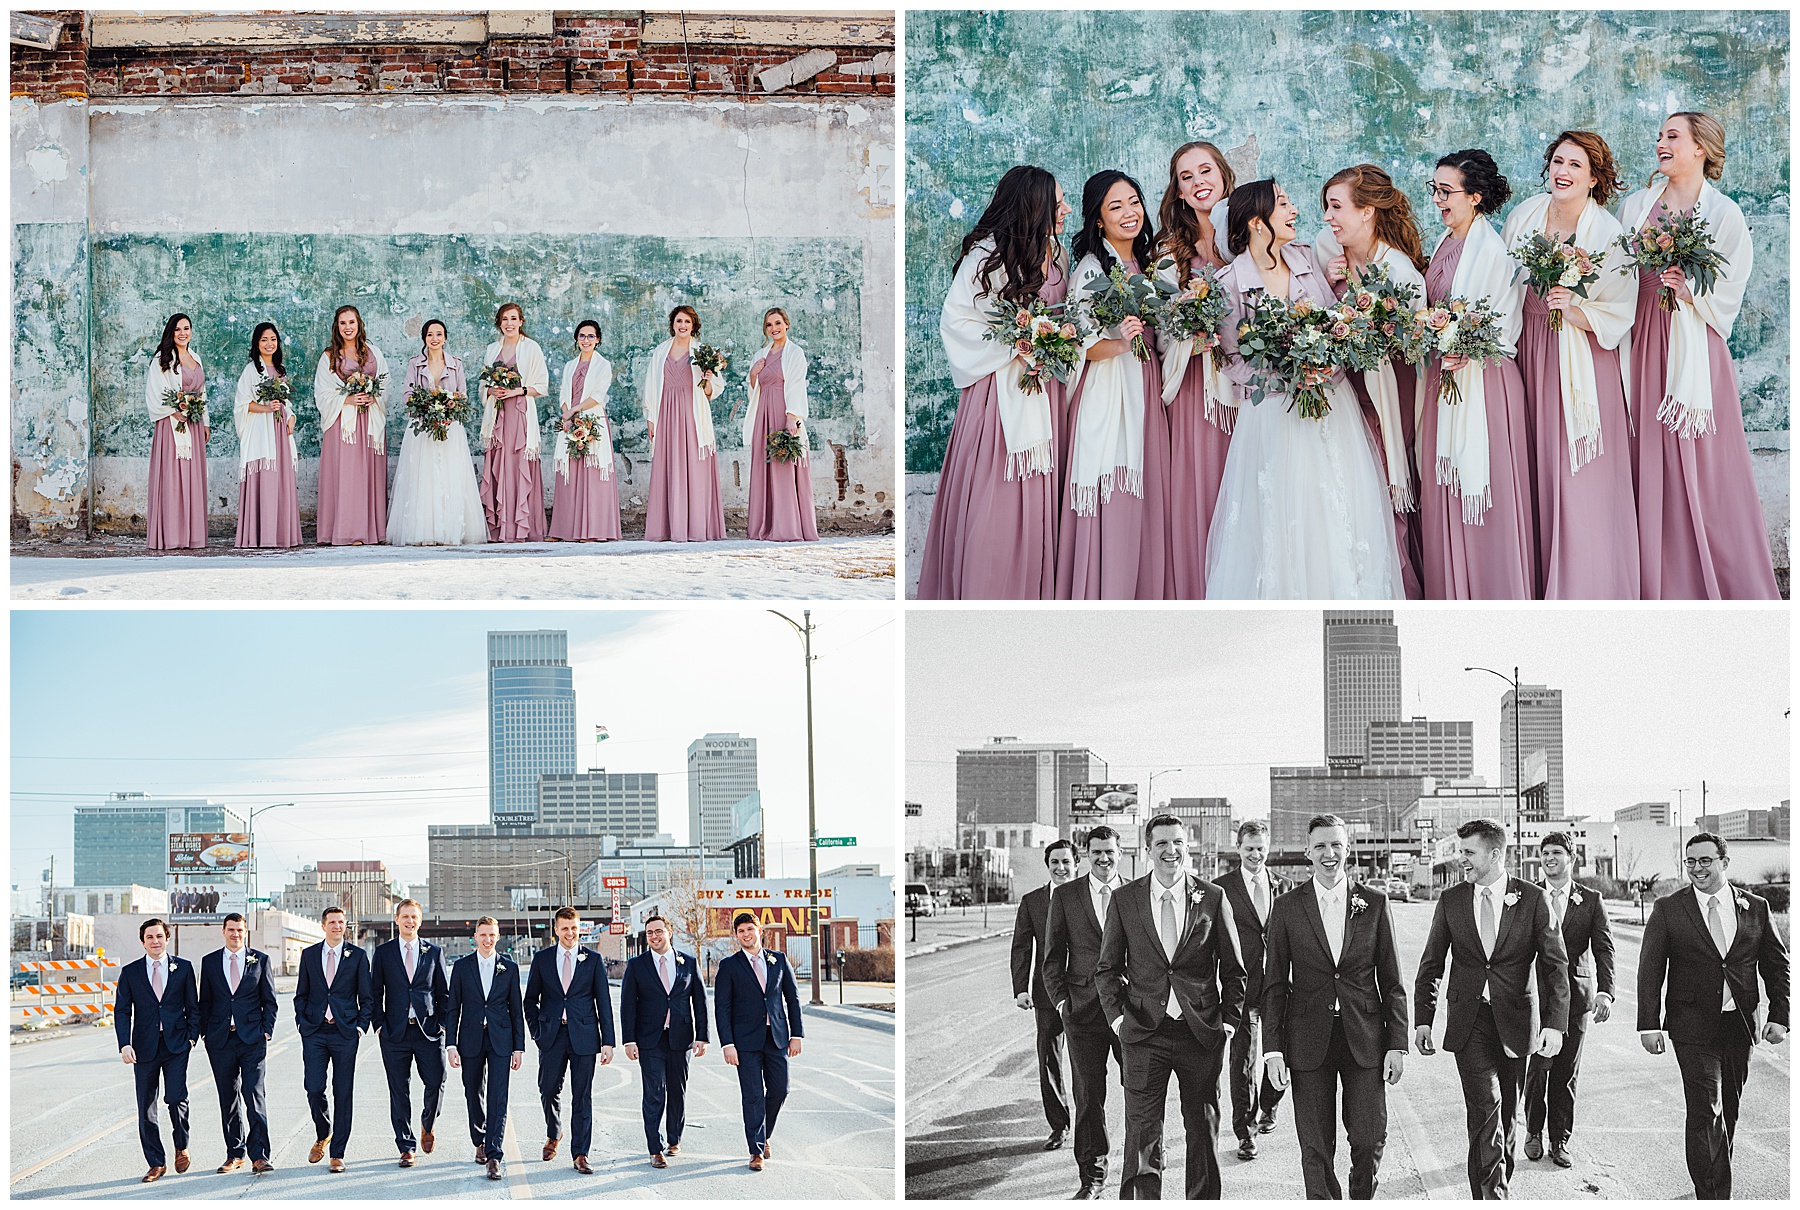 Brides pictures with bridesmaids and Groom with Groomsmen